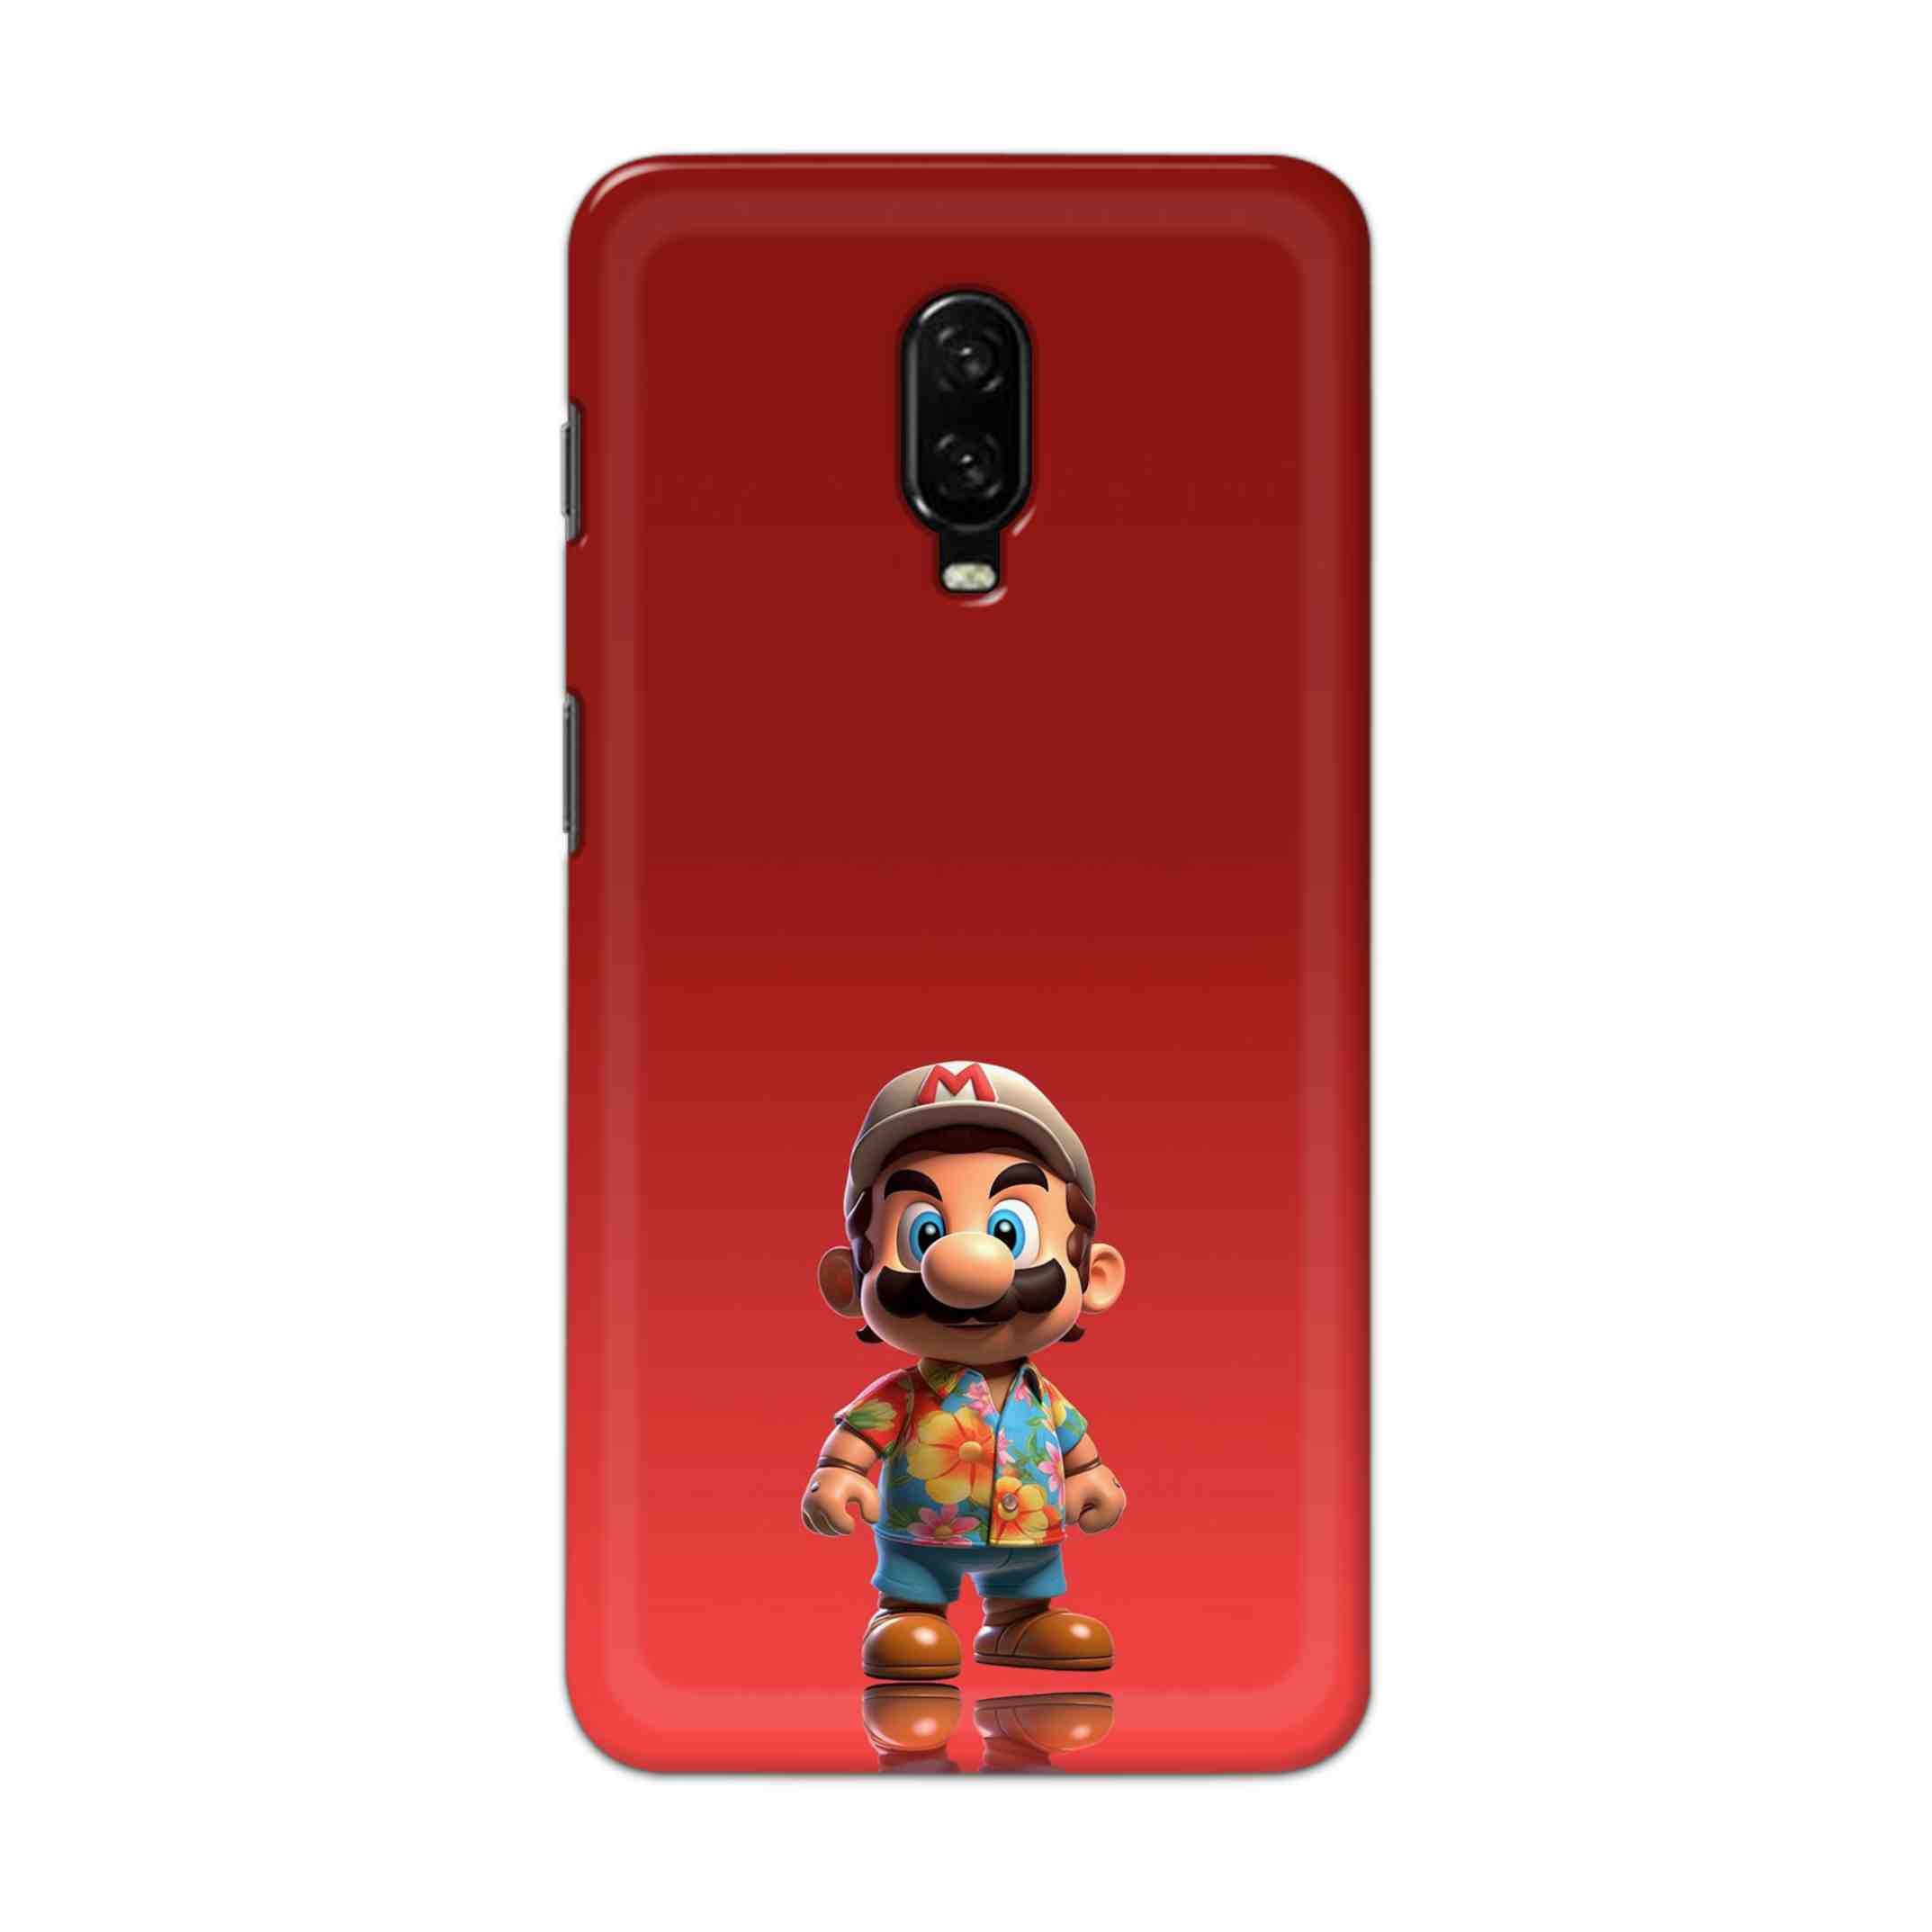 Buy Mario Hard Back Mobile Phone Case Cover For OnePlus 6T Online